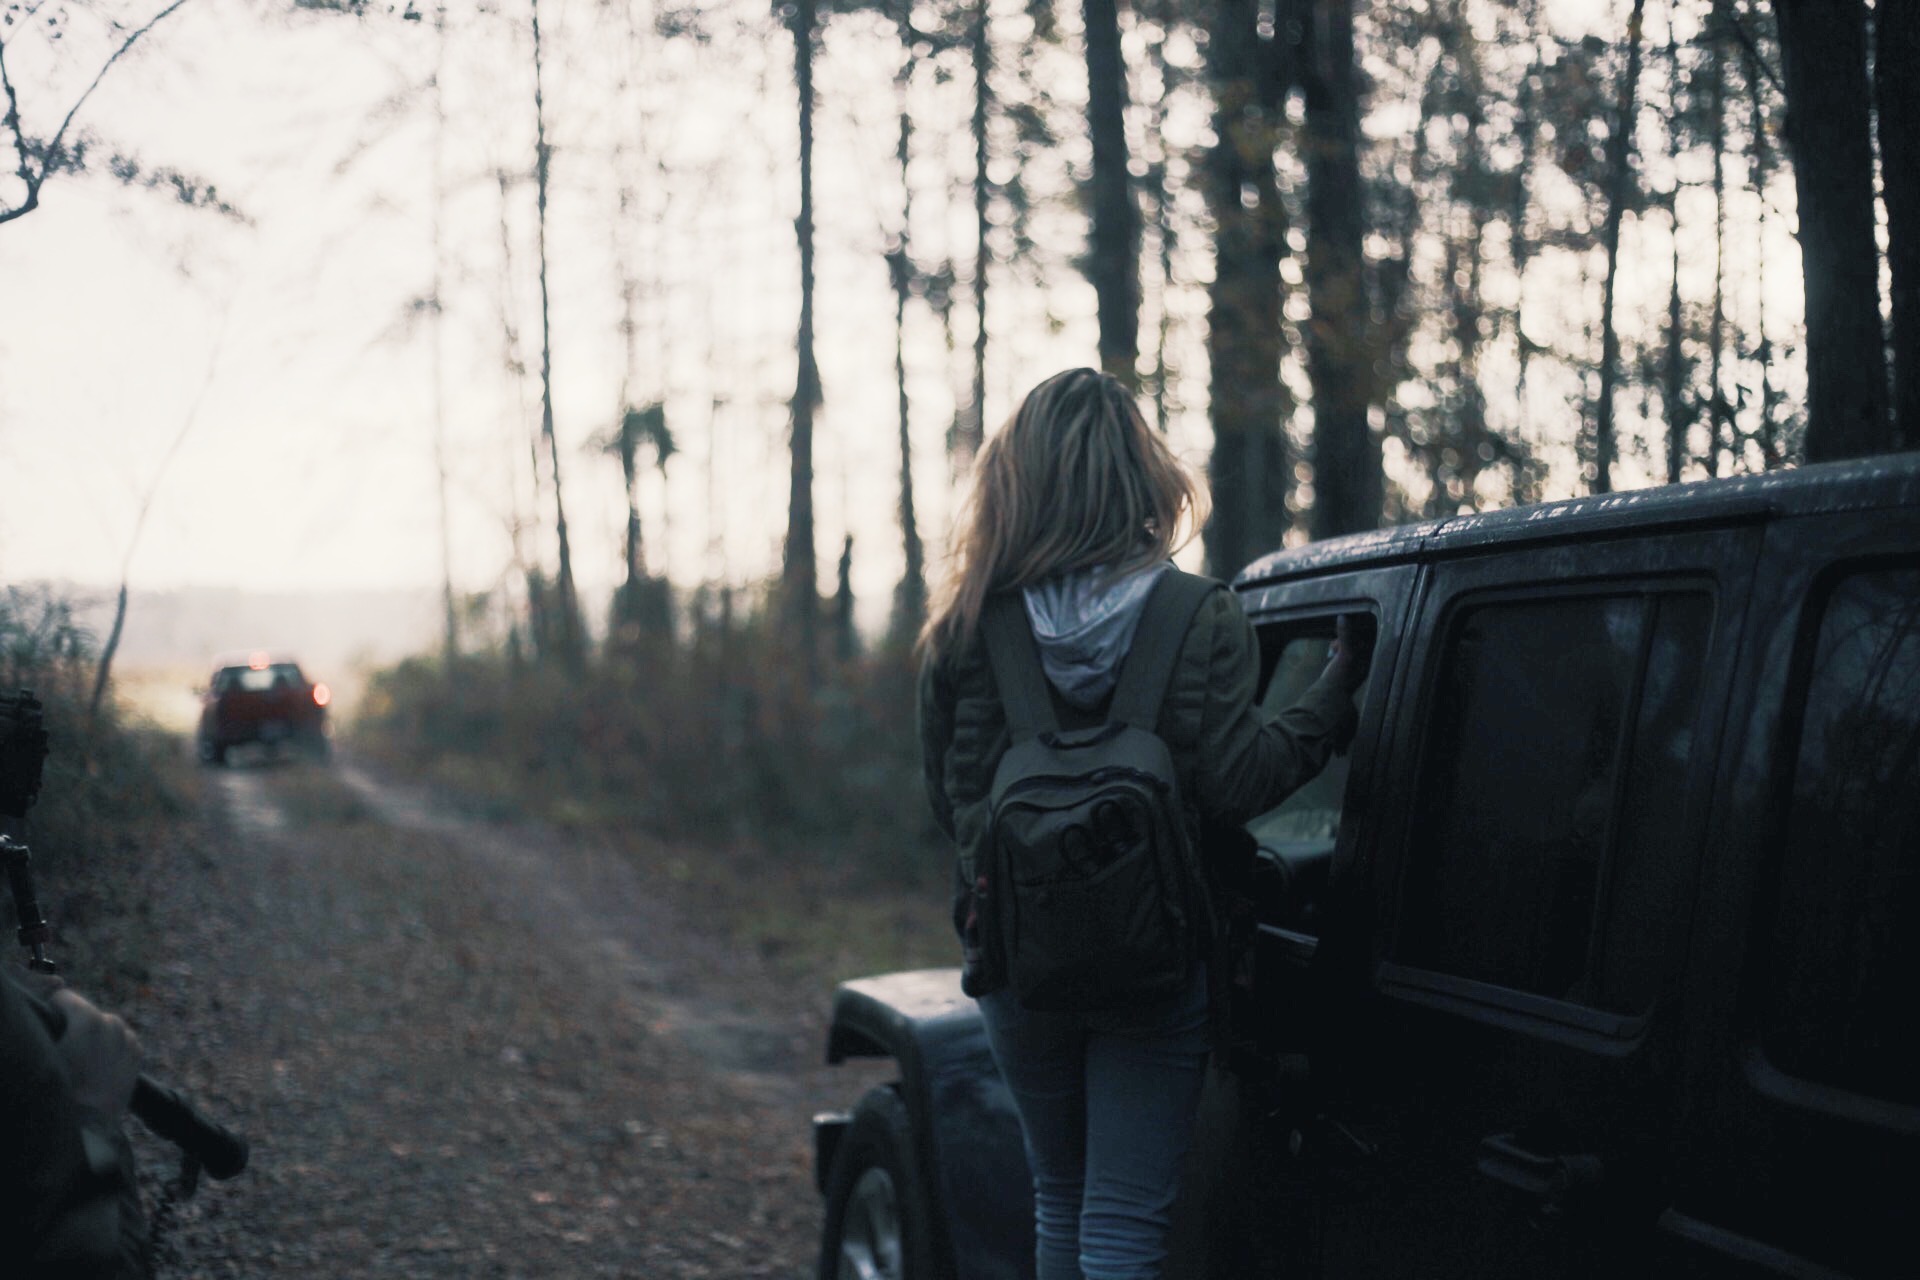 View from behind of woman with long blond hair wearing a backpack standing by a jeep looking at a red pickup truck up the road